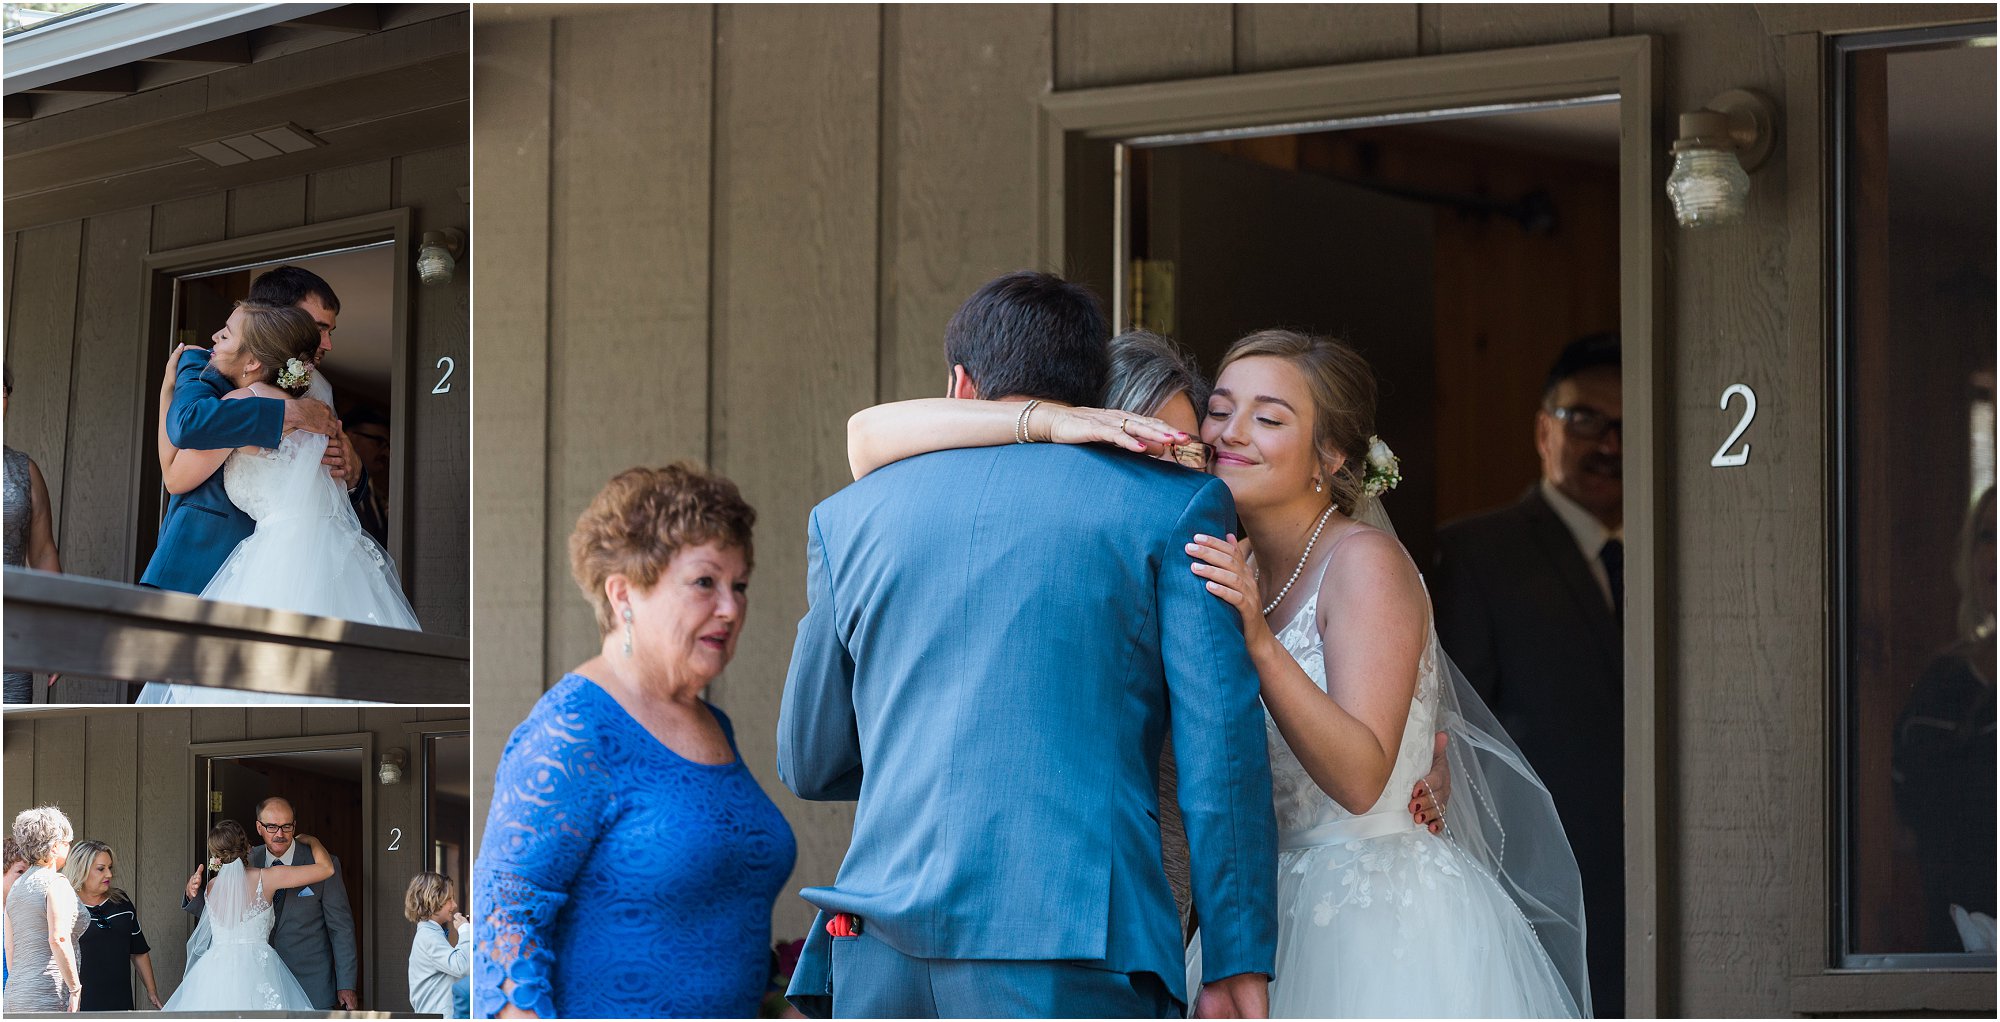 The bride's father, brother and mother all react to seeing her dressed up for her special wedding at Rock Springs Ranch in Tumalo, OR. | Erica Swantek Photography